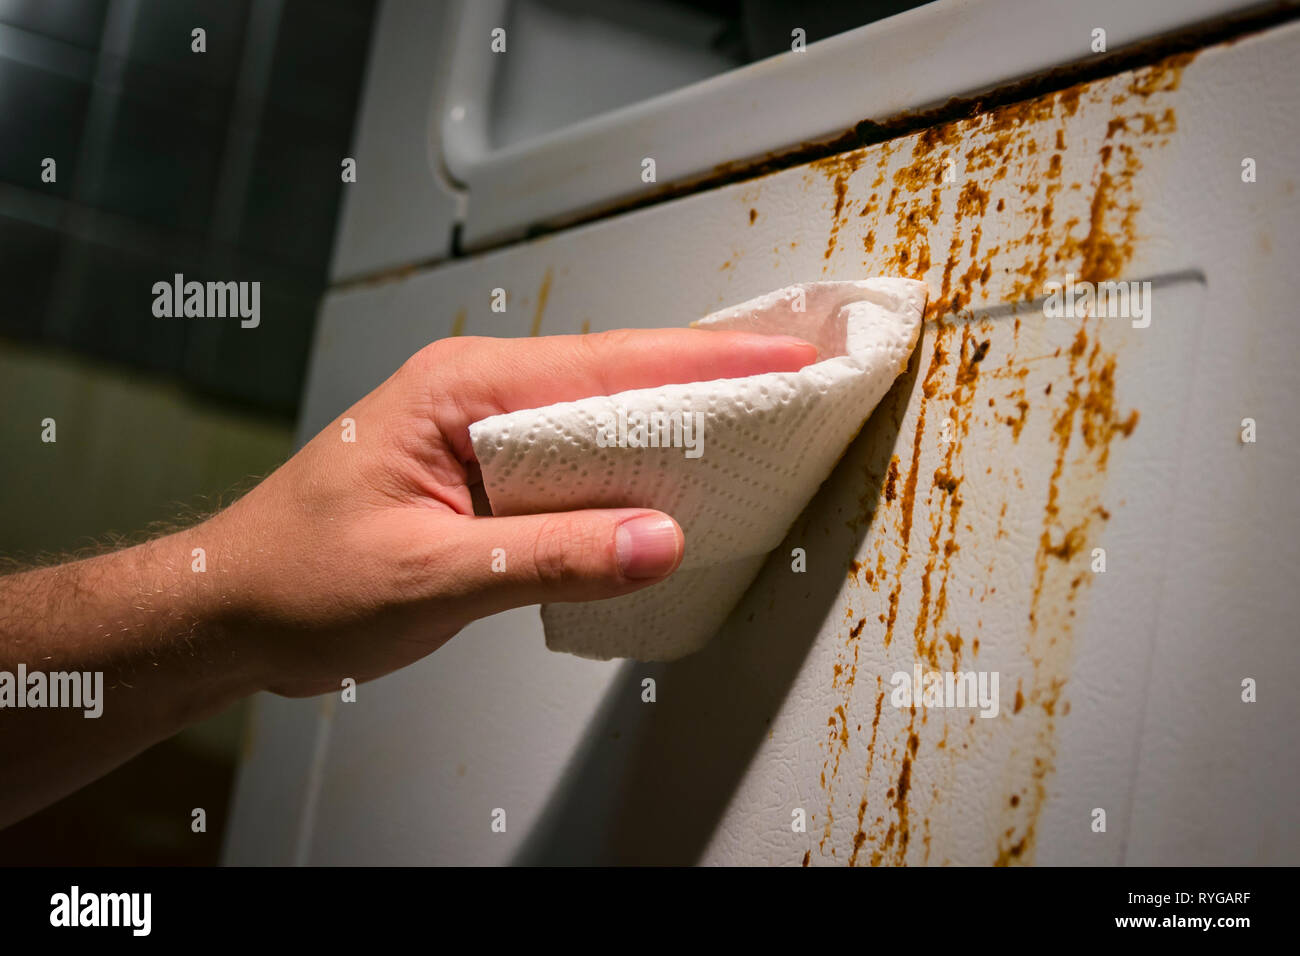 Hand cleaning baked on kitchen grime on side of oven appliance, using paper  towel and cleaner Stock Photo - Alamy